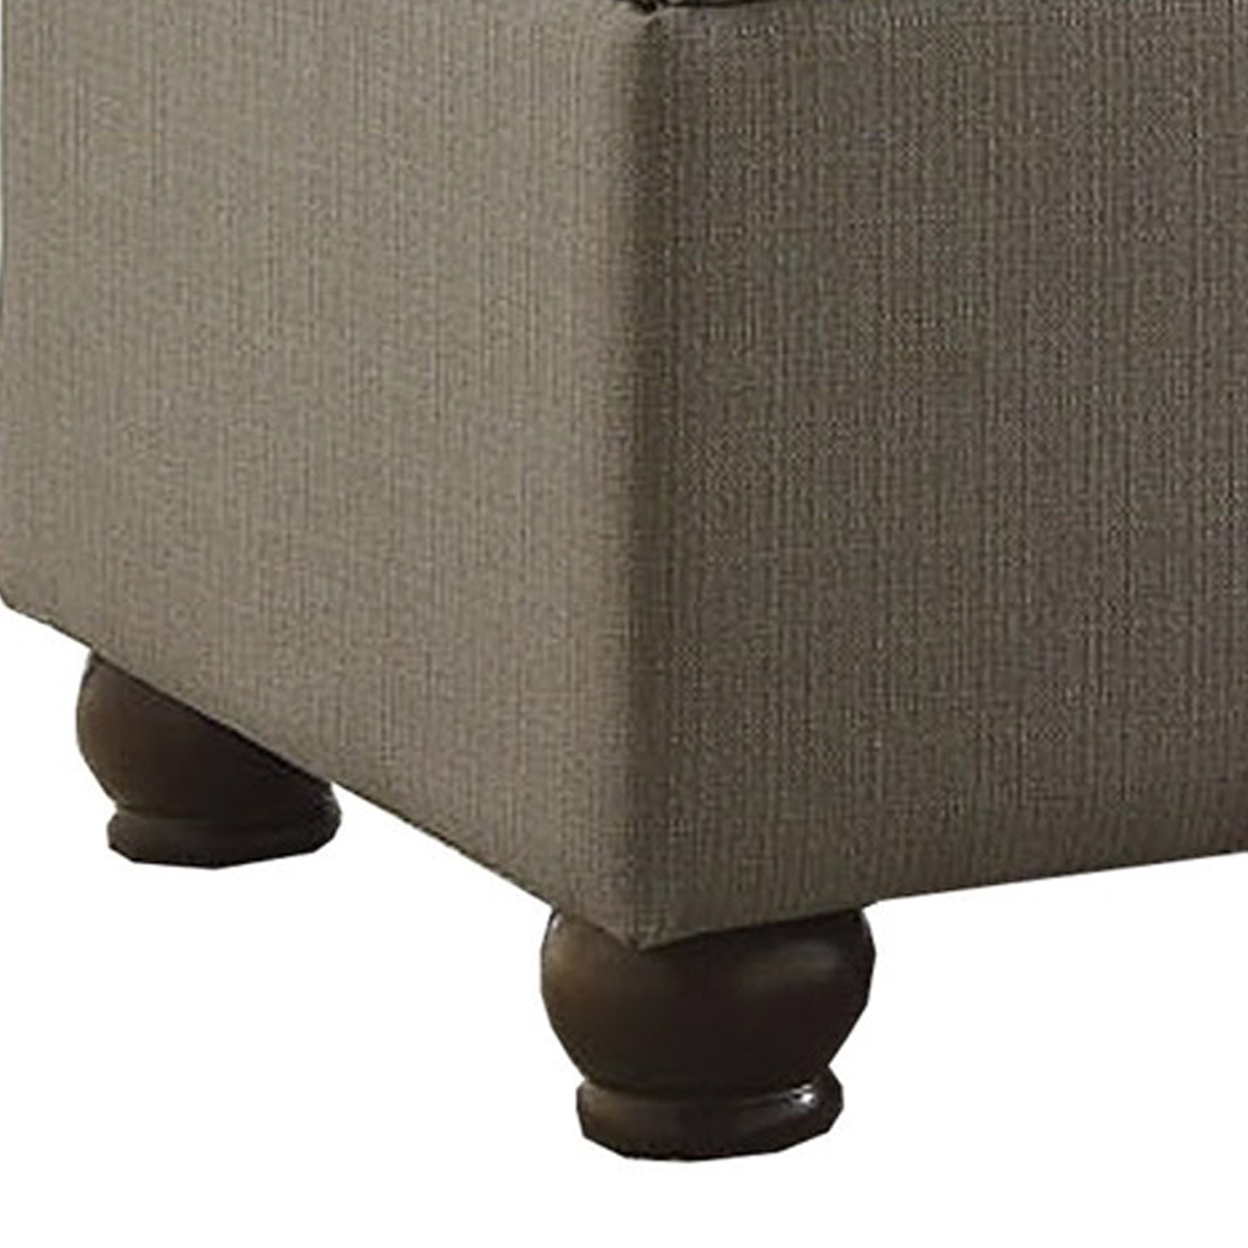 Textured Fabric Upholstered Button Tufted Storage Bench With Wooden Bun Feet, Gray And Brown- Saltoro Sherpi